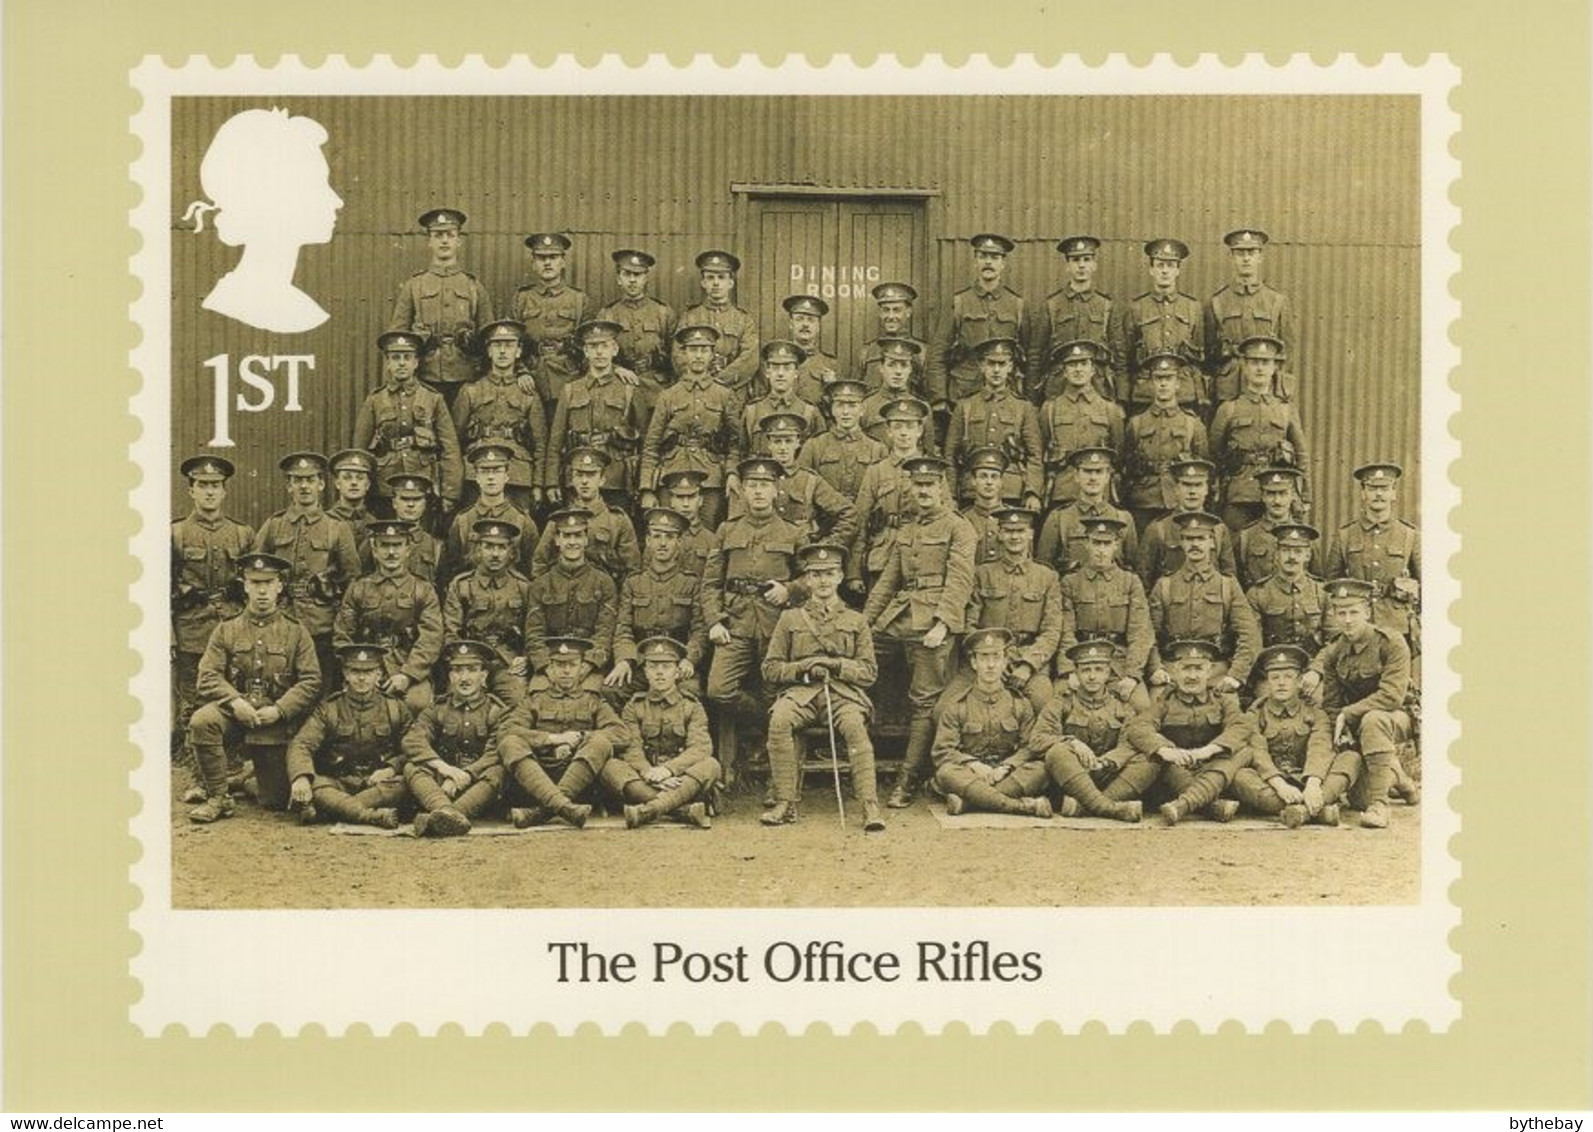 Great Britain 2016 PHQ Card Sc 3513a 1st The Post Office Rifles - PHQ Cards